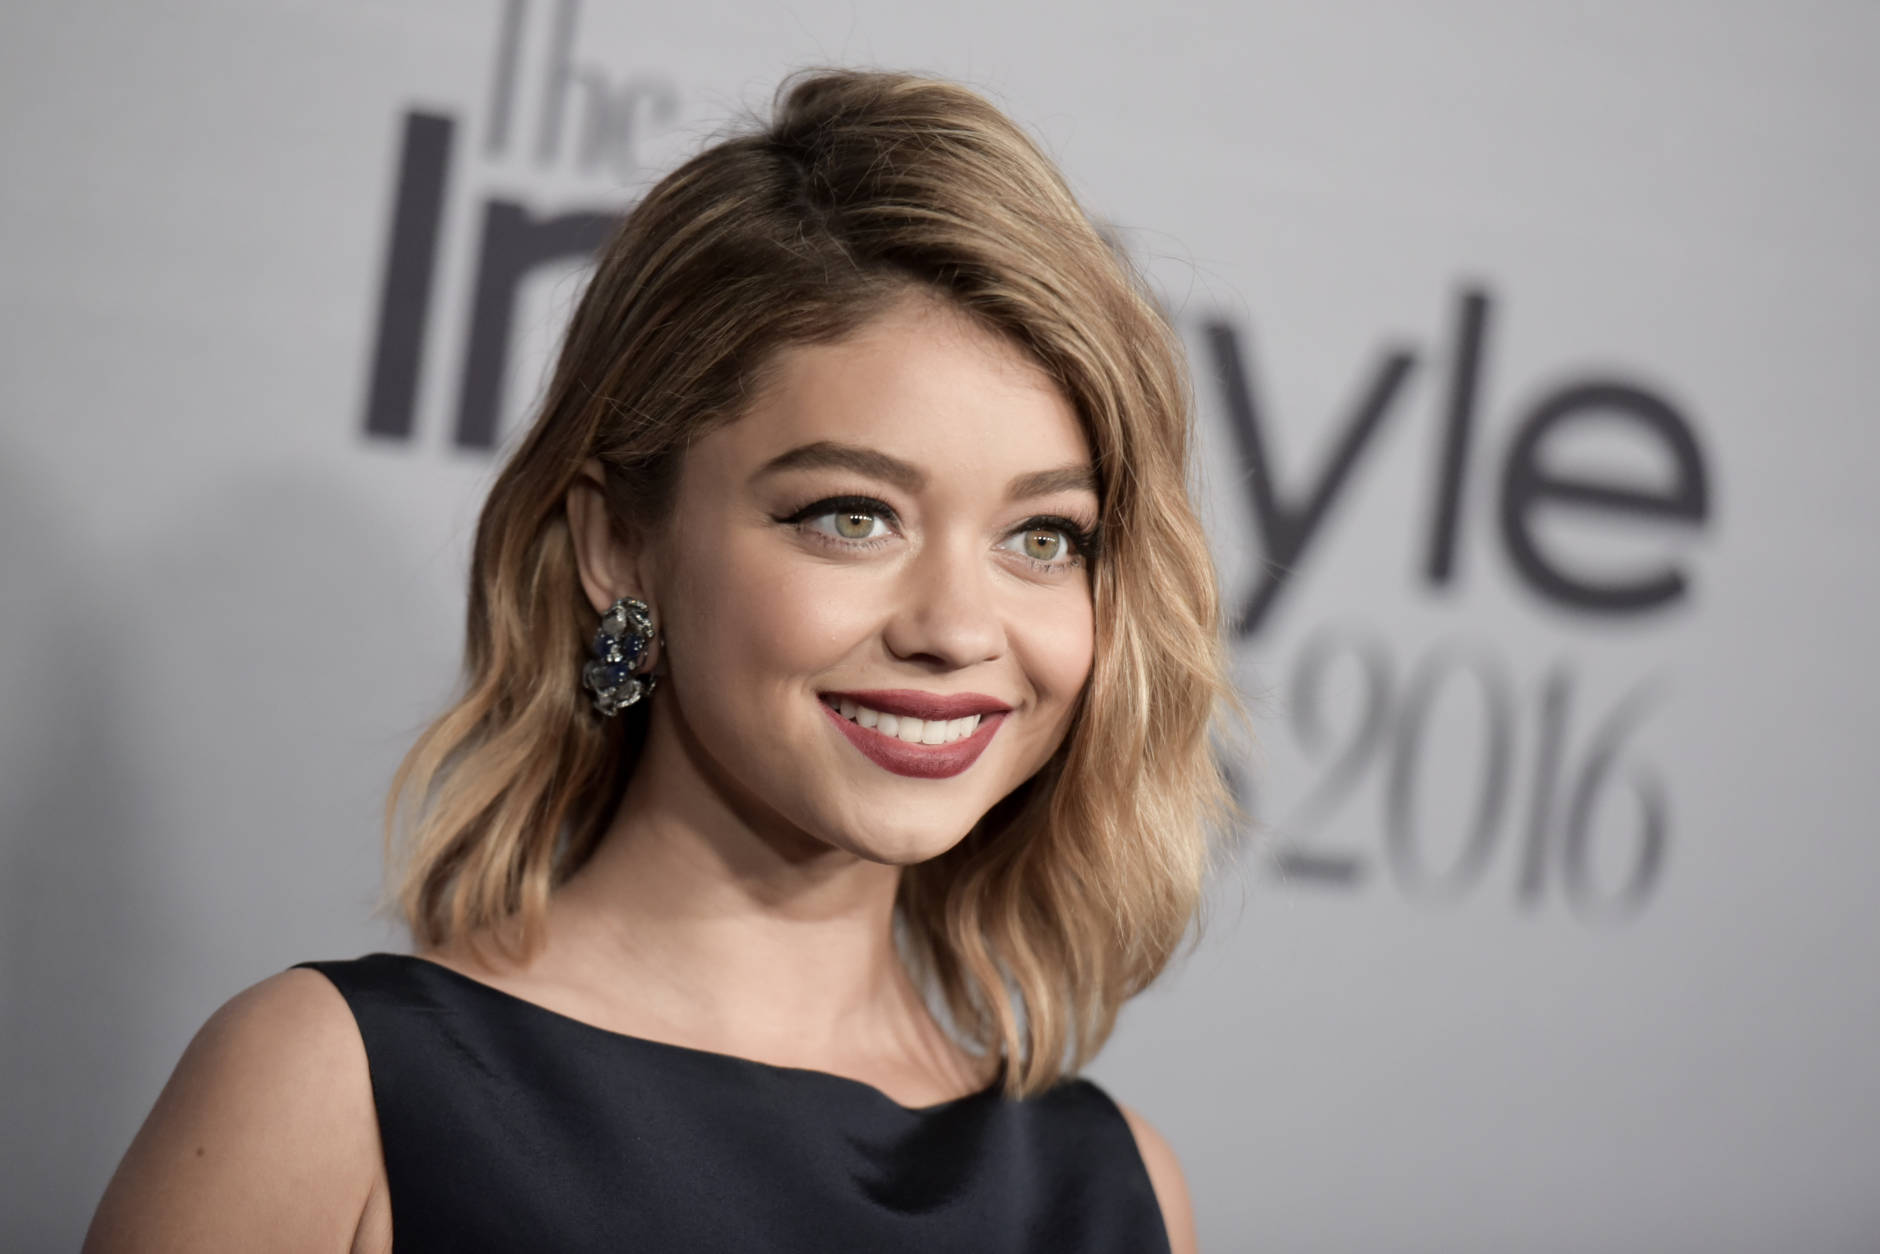 Sarah Hyland attends the 2nd Annual InStyle Awards at The Getty Center on Monday, Oct. 24, 2016, in Los Angeles. (Photo by Richard Shotwell/Invision/AP)